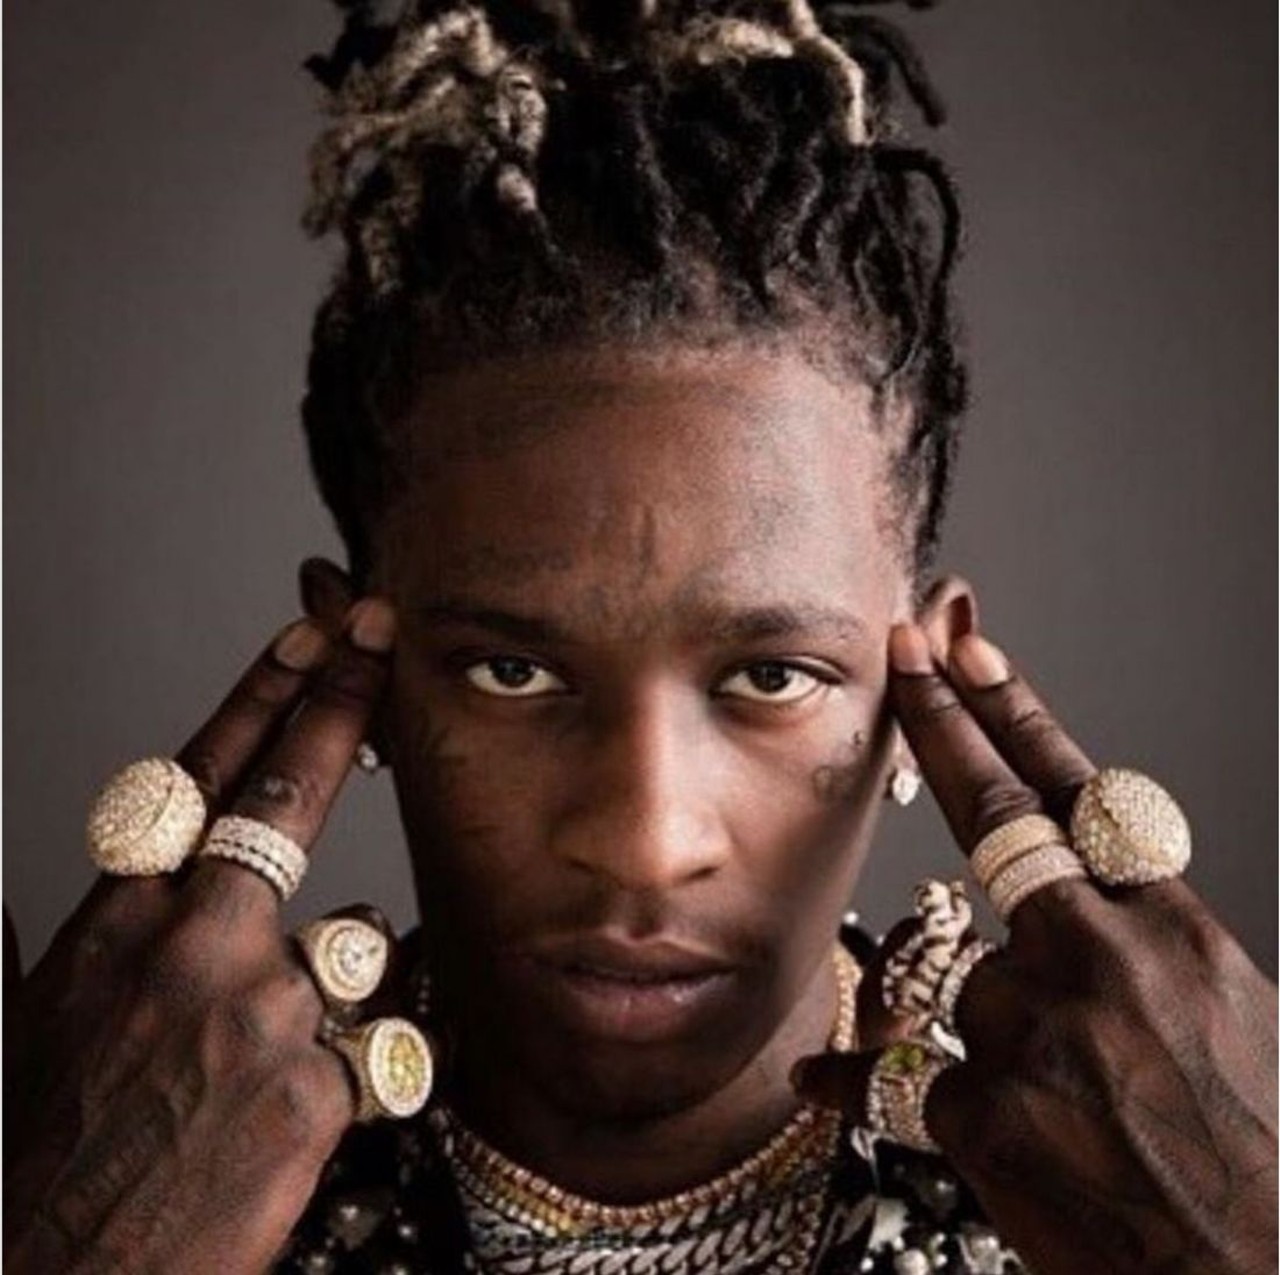  "No Wendy&#146;s (Controlla Remix)," by Young Thug  
On this track the rapper does name drop Cleveland, but he's referencing Cleveland Avenue in Atlanta, where he's from. However, Young Thug follows it up quick with a Kyrie Irving reference rapping, "I'm on Cleveland like I'm Kyrie Irving/Same place I caught my first STD."
Photo via youngthug/Instagram